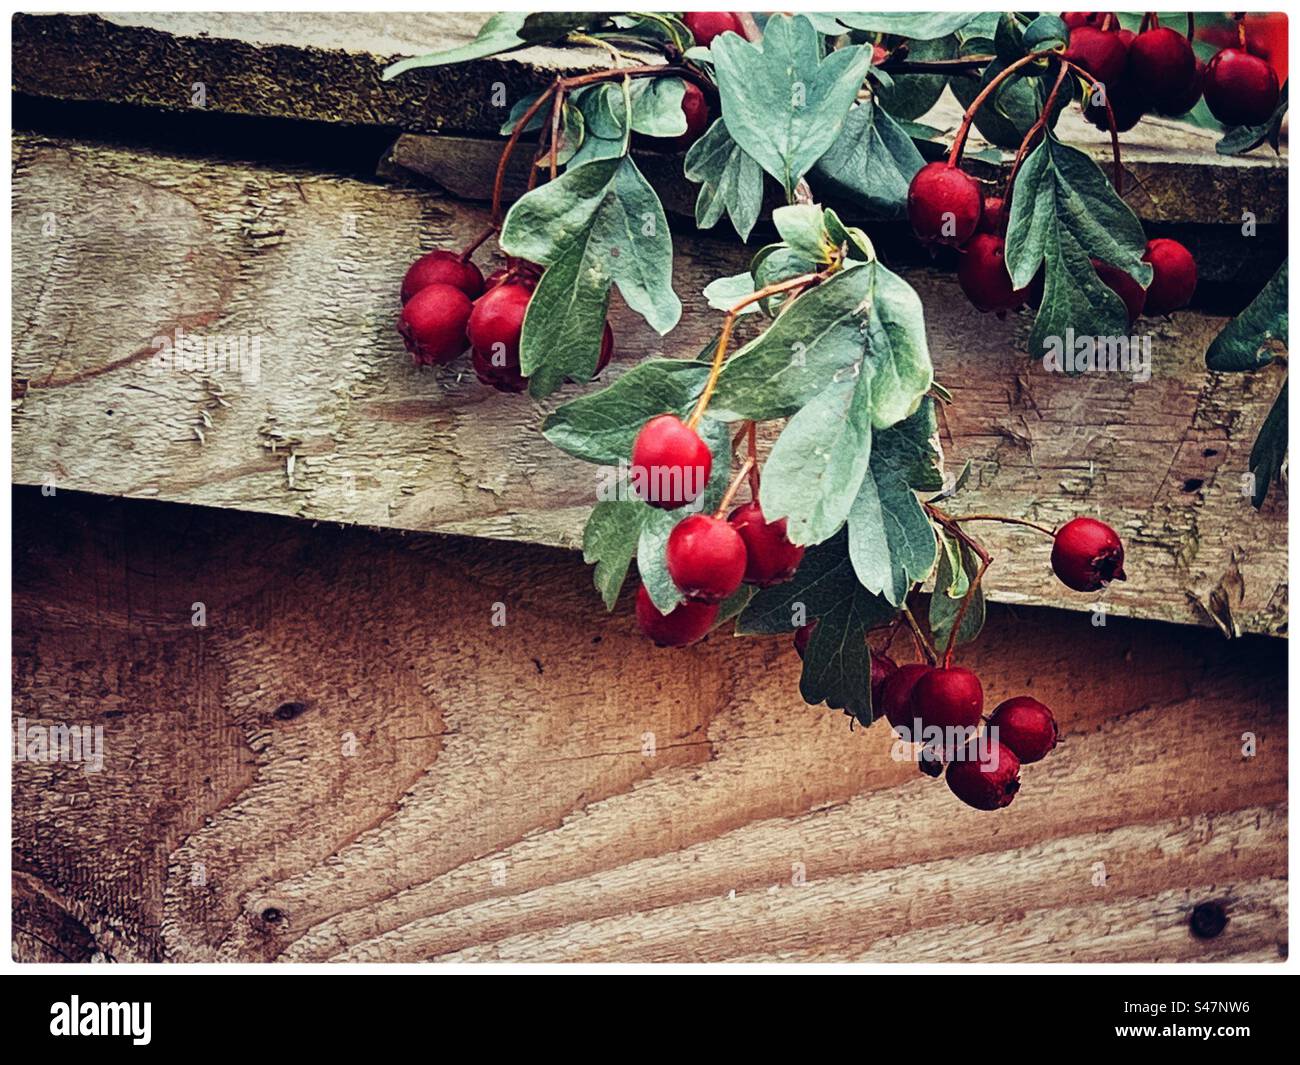 Clippings draped over wooden fence Stock Photo